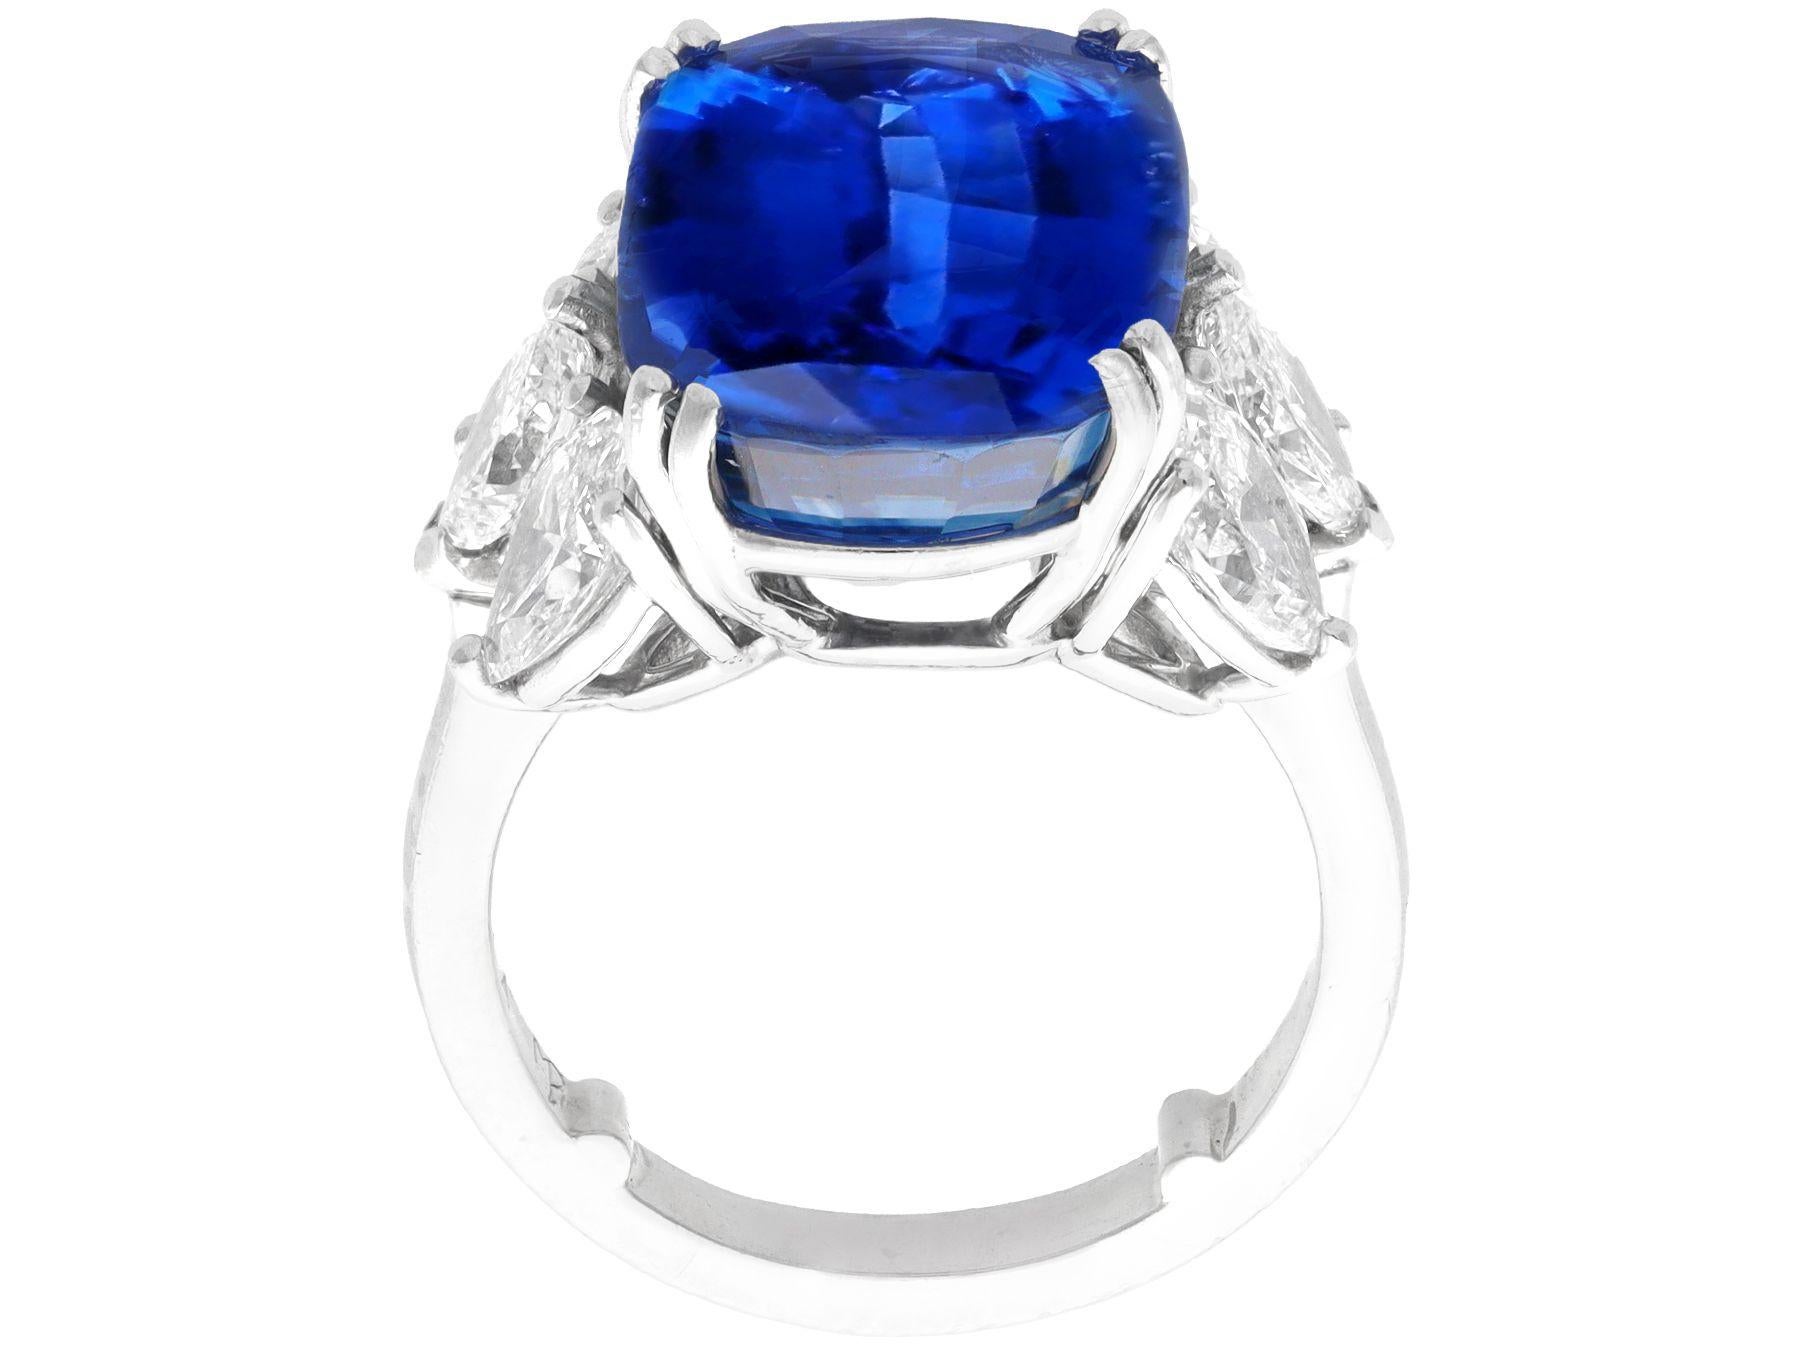 Vintage 16.38 Carat Ceylon Sapphire and 3.36 Carat Diamond Cocktail Ring In Excellent Condition For Sale In Jesmond, Newcastle Upon Tyne